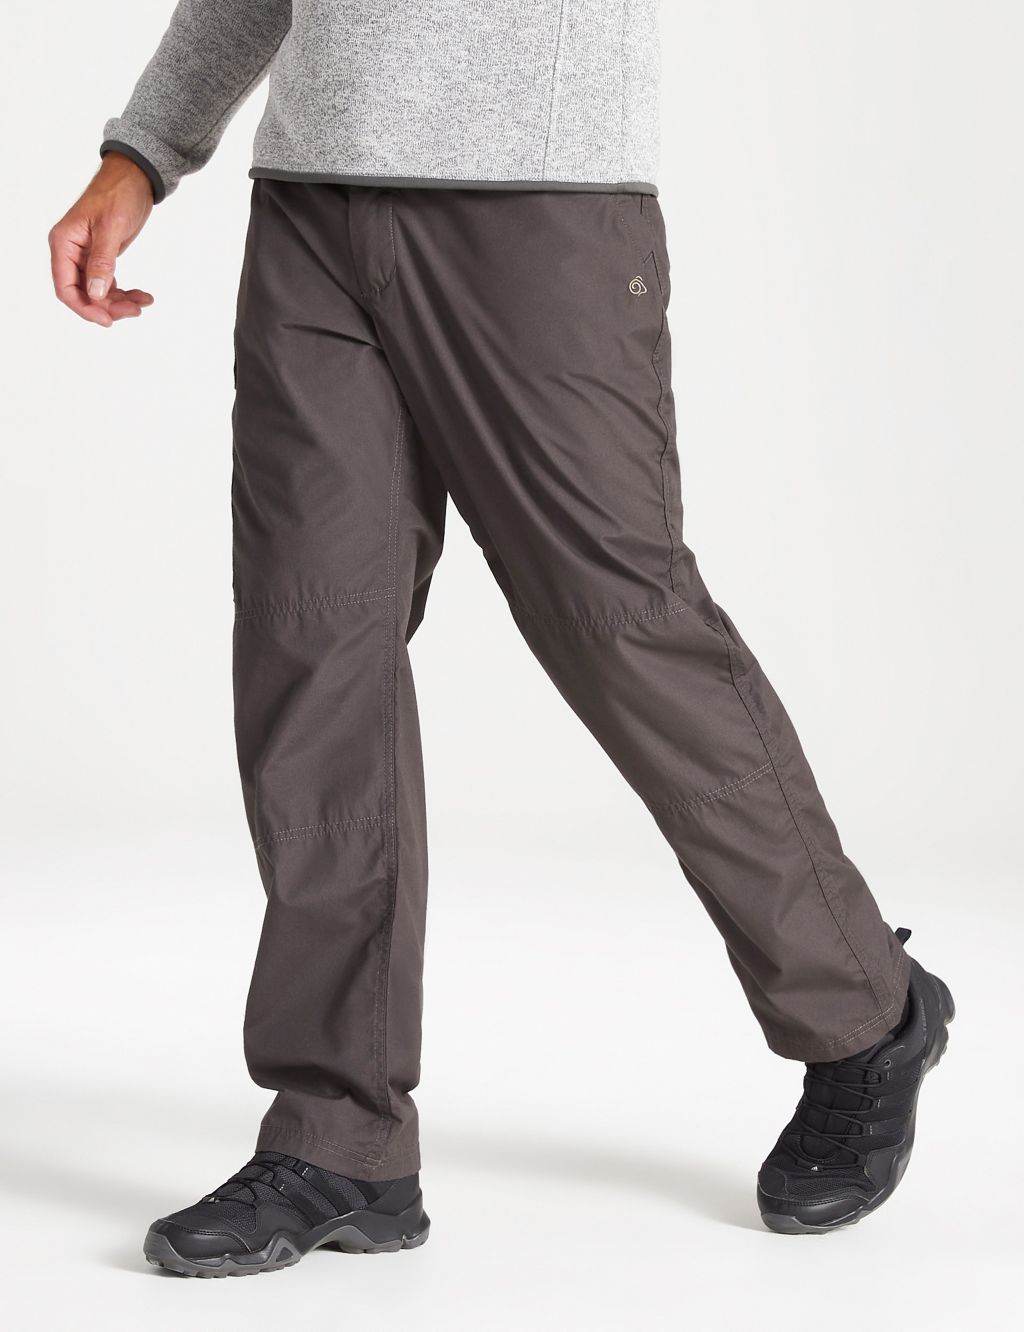 Kiwi Loose Fit Cargo Trousers image 1